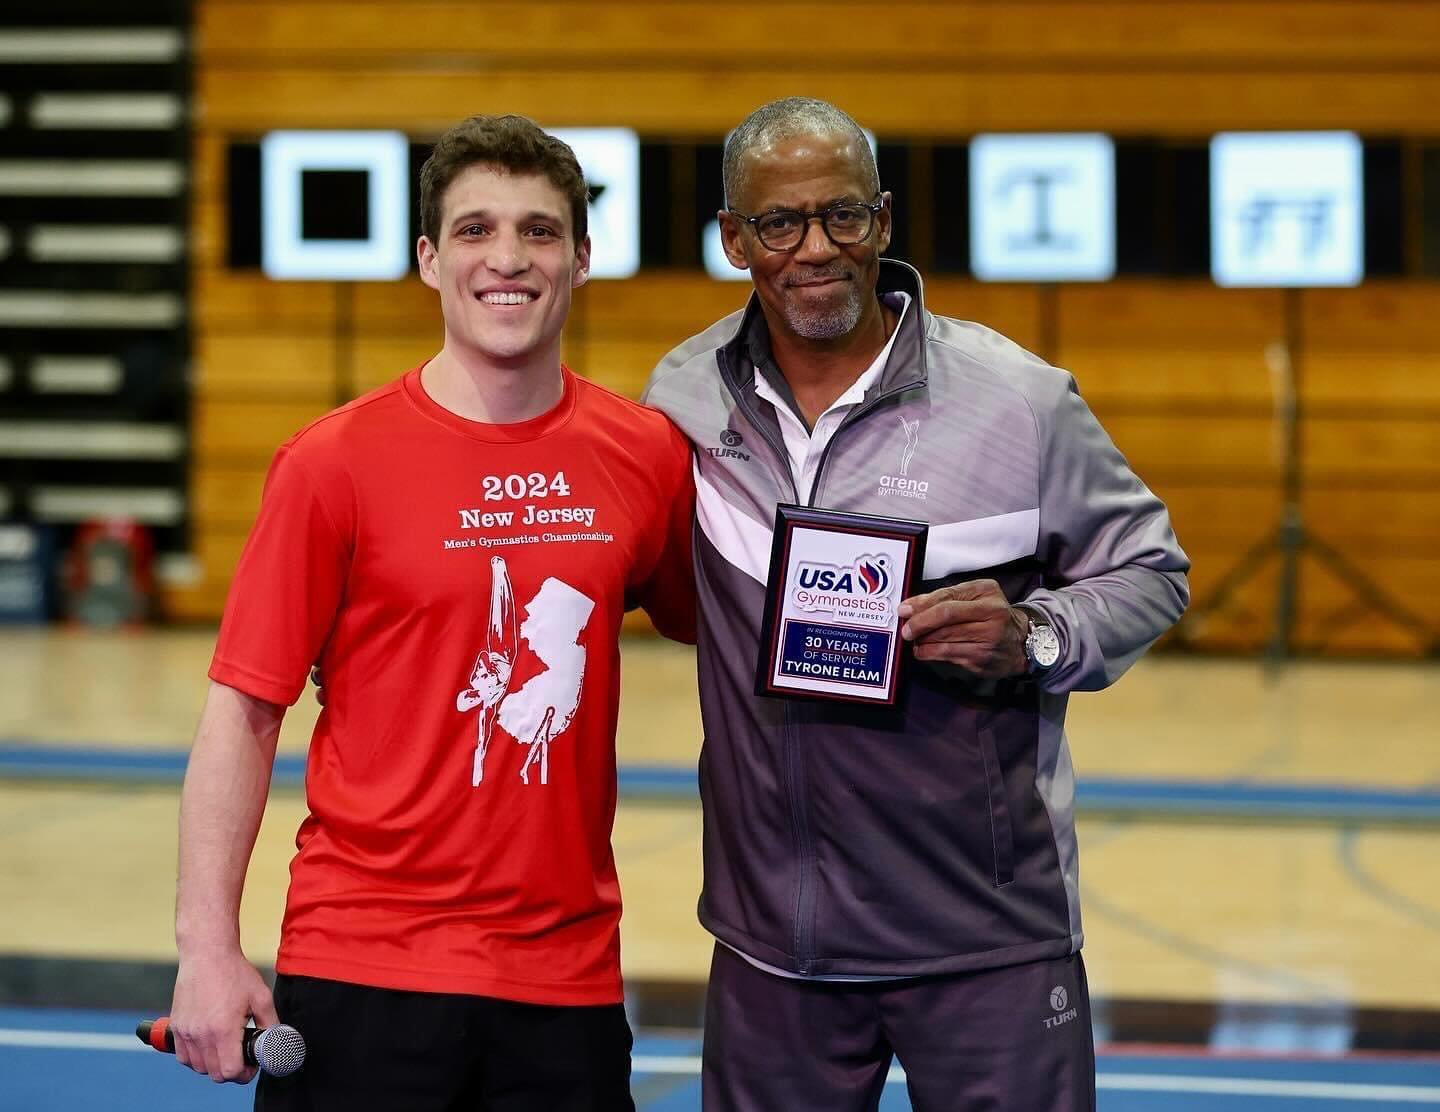 Coach Tyron Elam was recognized by USA Gymnastics NJ for his 30 years of dedication to teaching gymnastics!! Congratulations coach Ty 🎉We are so proud and lucky to have you! 
#arenaproud